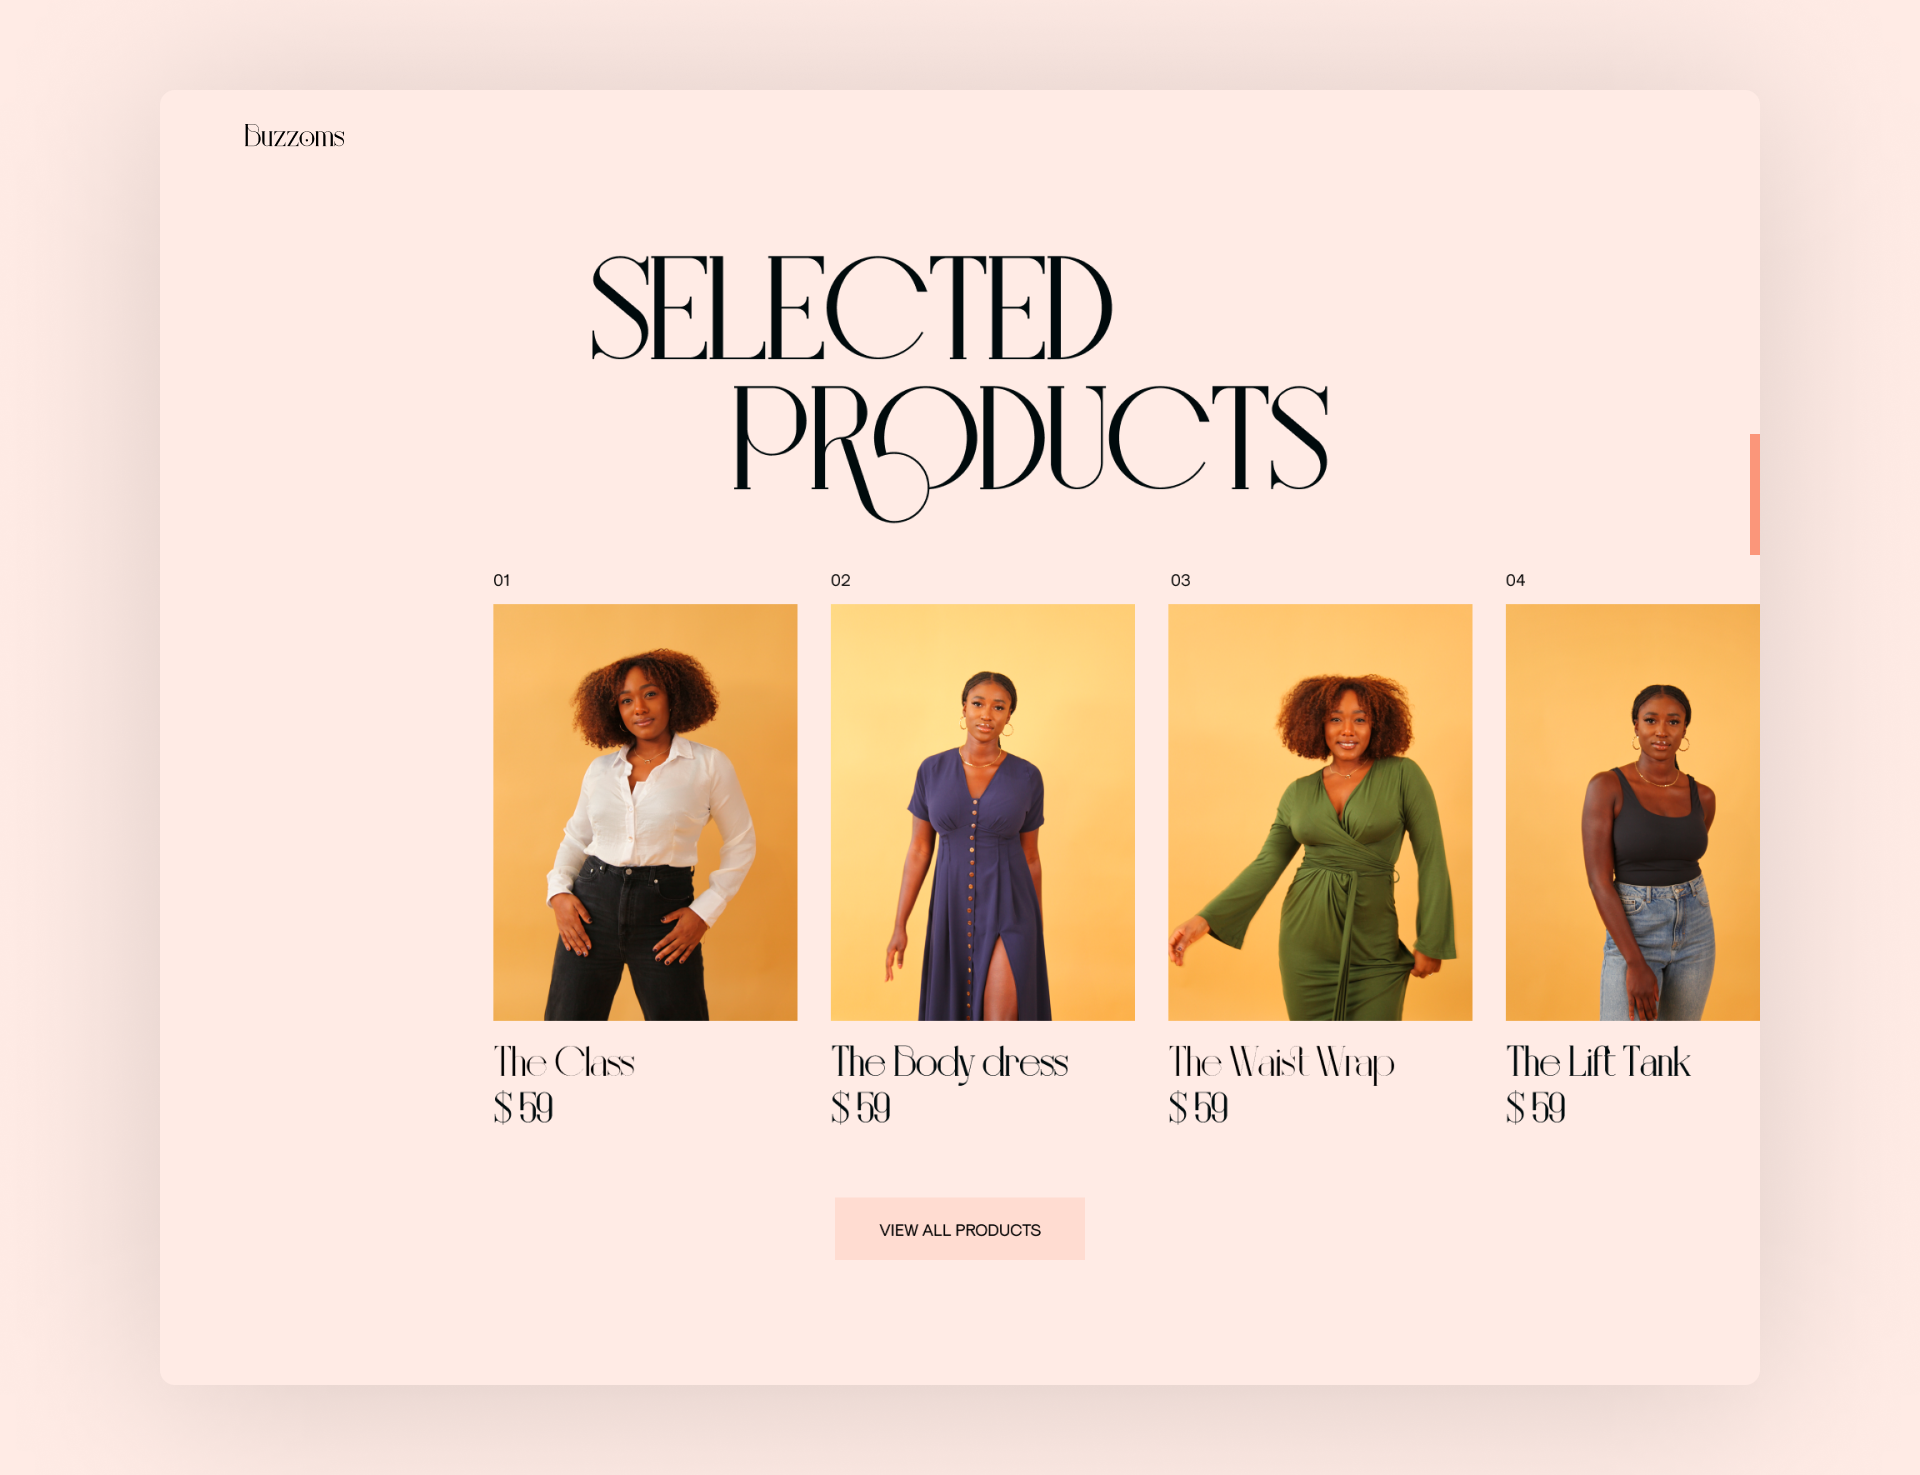 Final UI Design of the Product showcase section